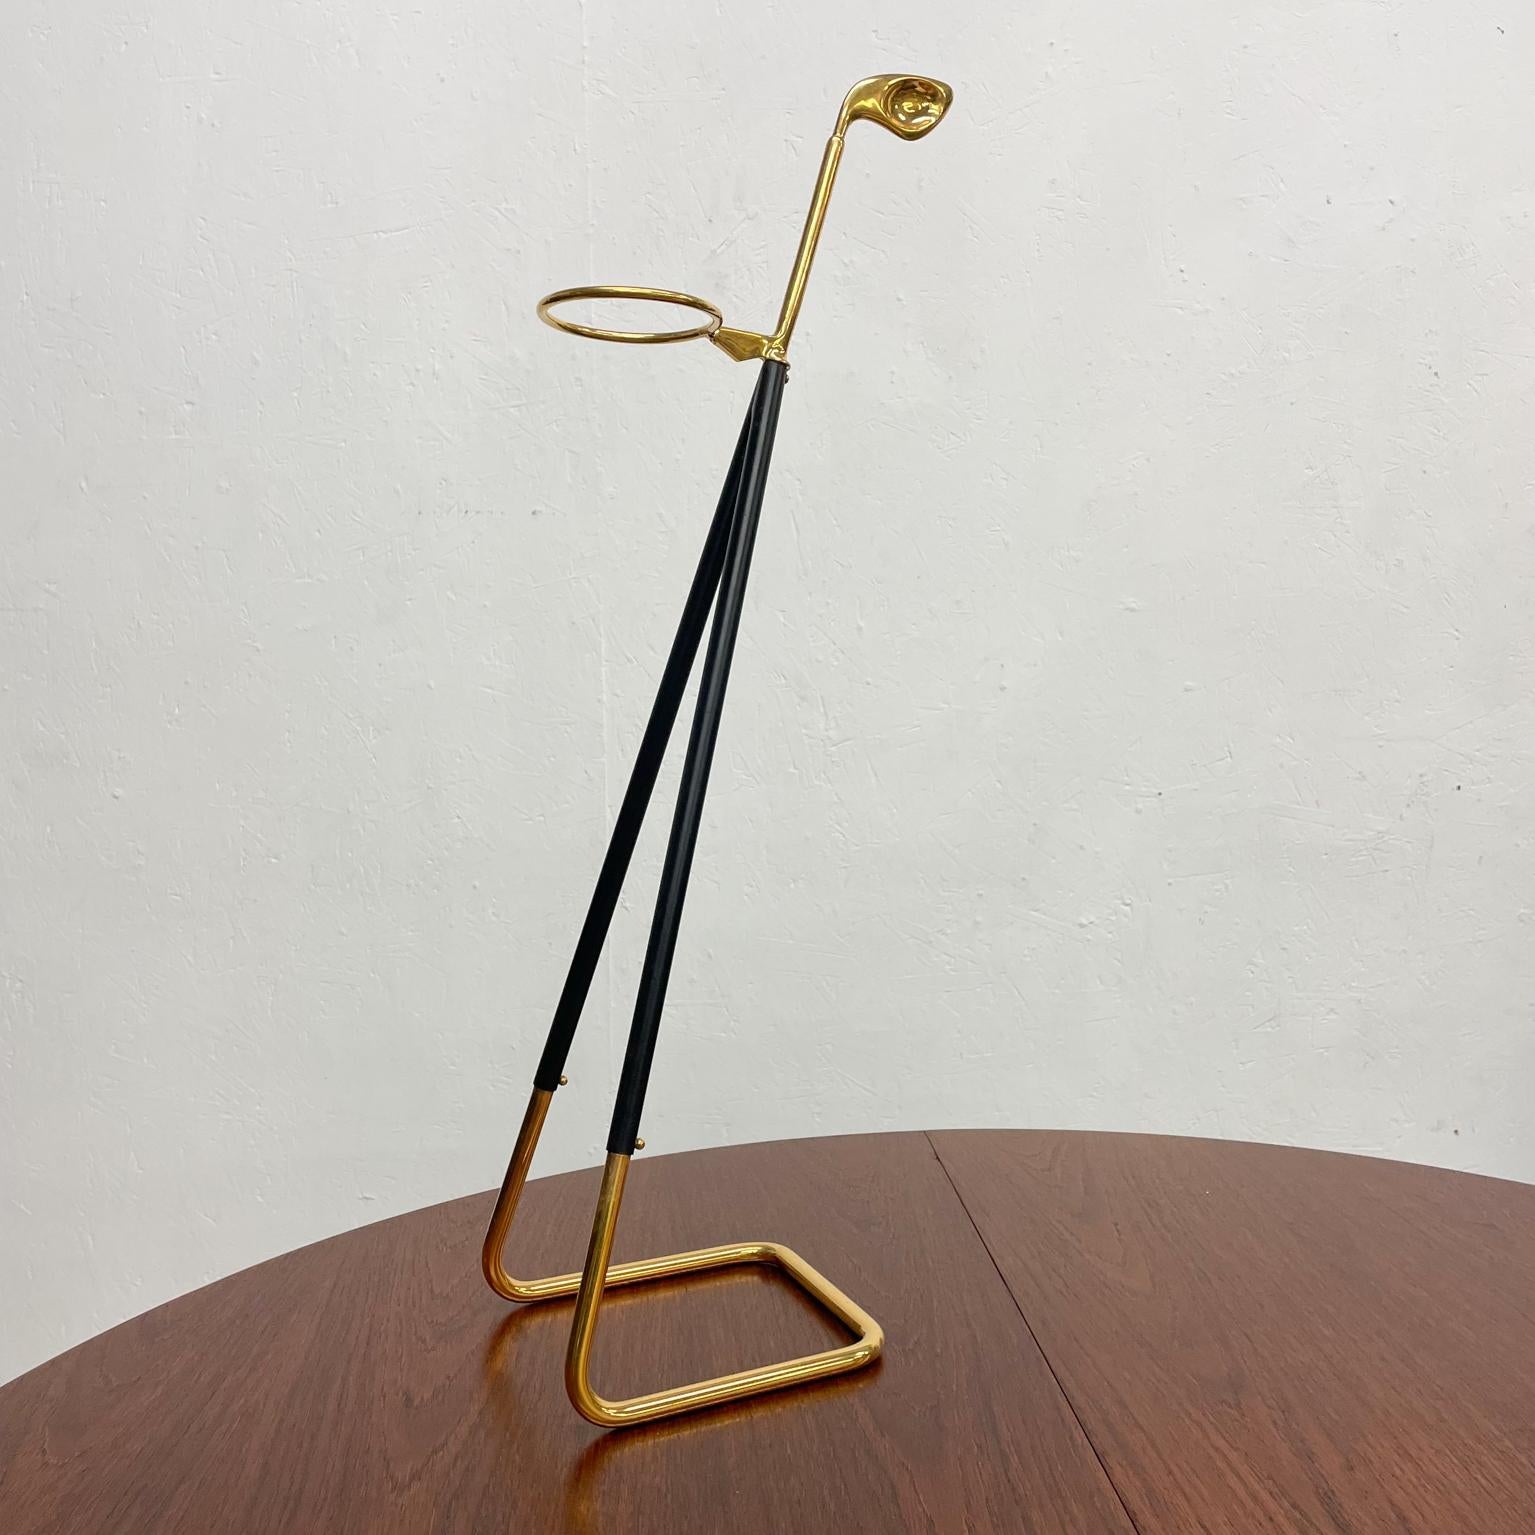 Modern Umbrella stand made in Italy 1950s
Crafted in polished brass and black Metal 
In the style of Cesare Lacca & Ico Parisi 
In original unrestored like new vintage condition.
Unmarked
Measures: 6.63 W x 11.25 D x 27.38 H inches
Refer to